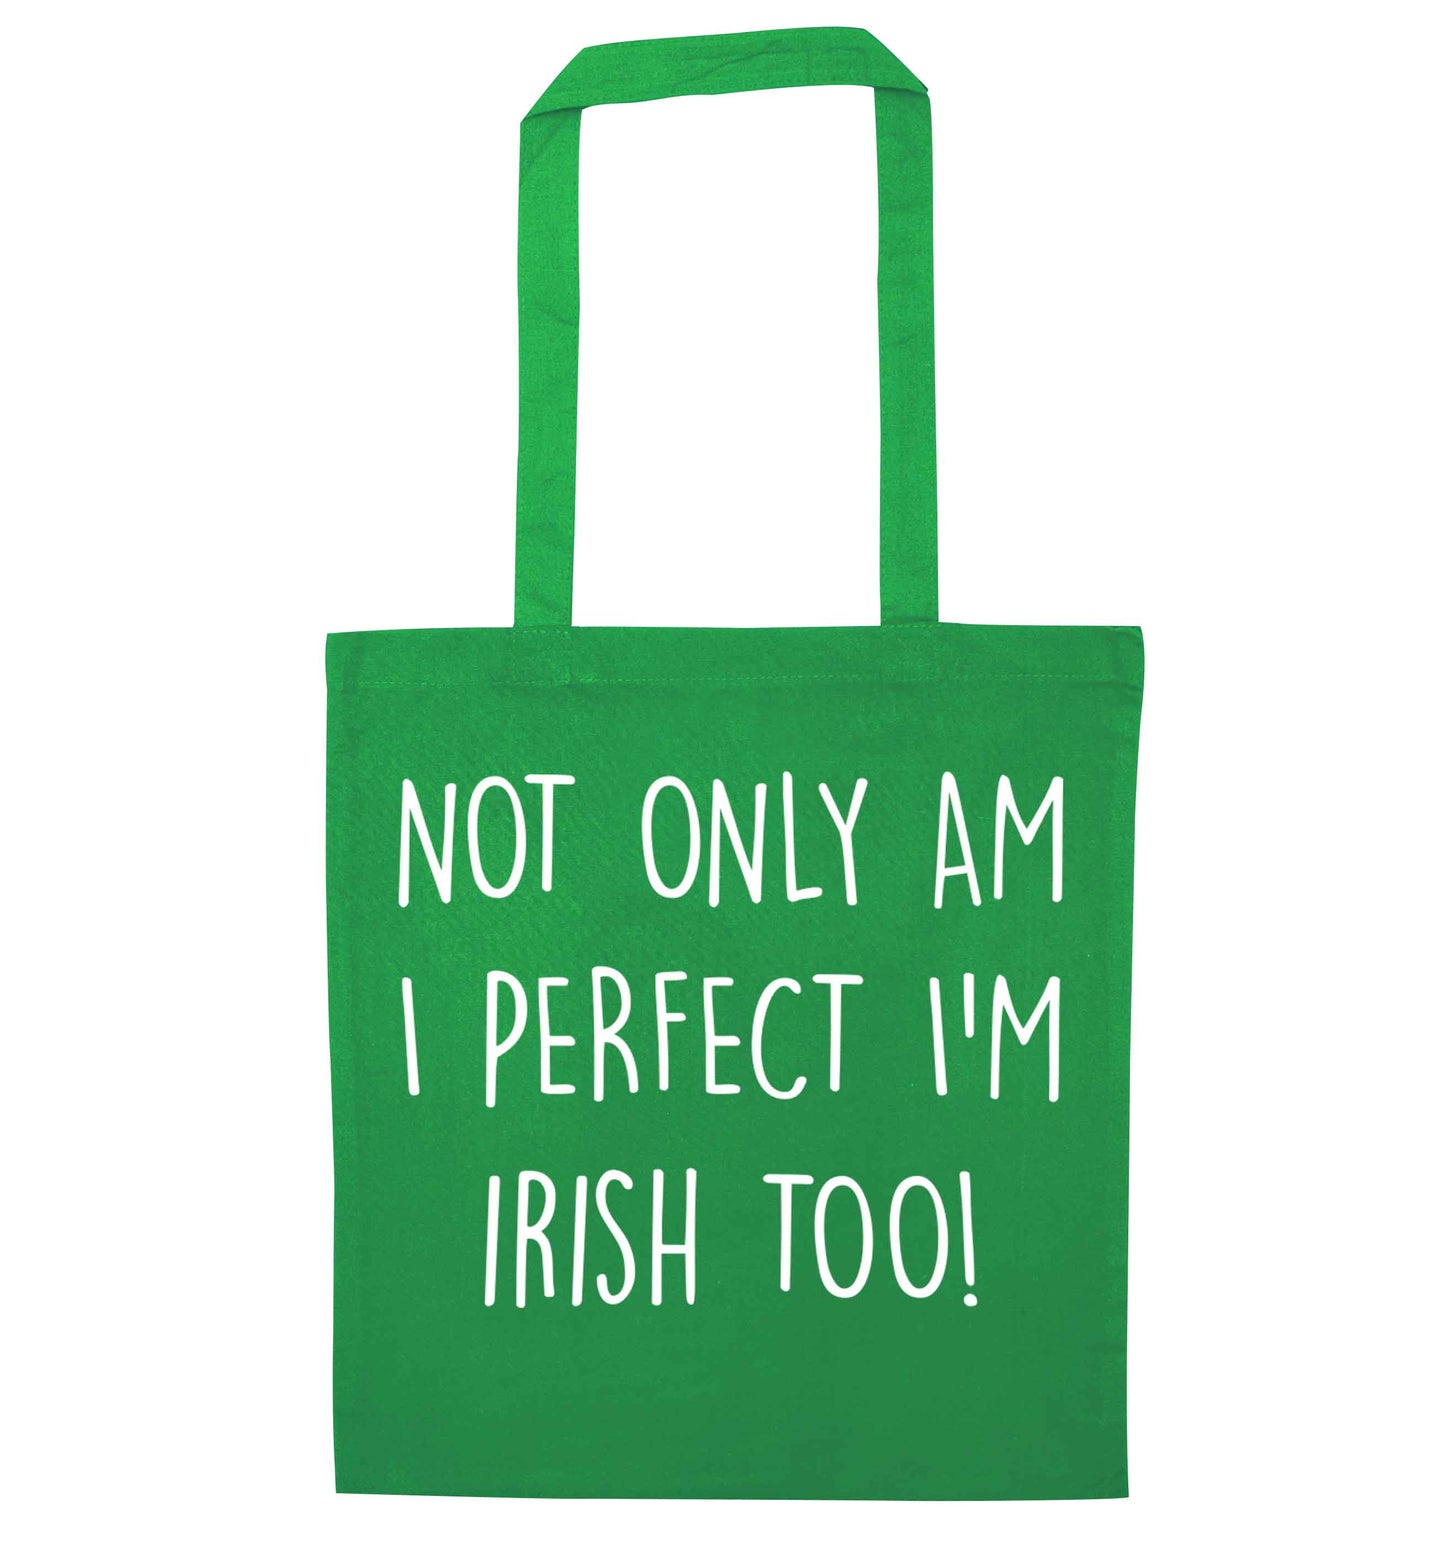 Not only am I perfect I'm Irish too! green tote bag